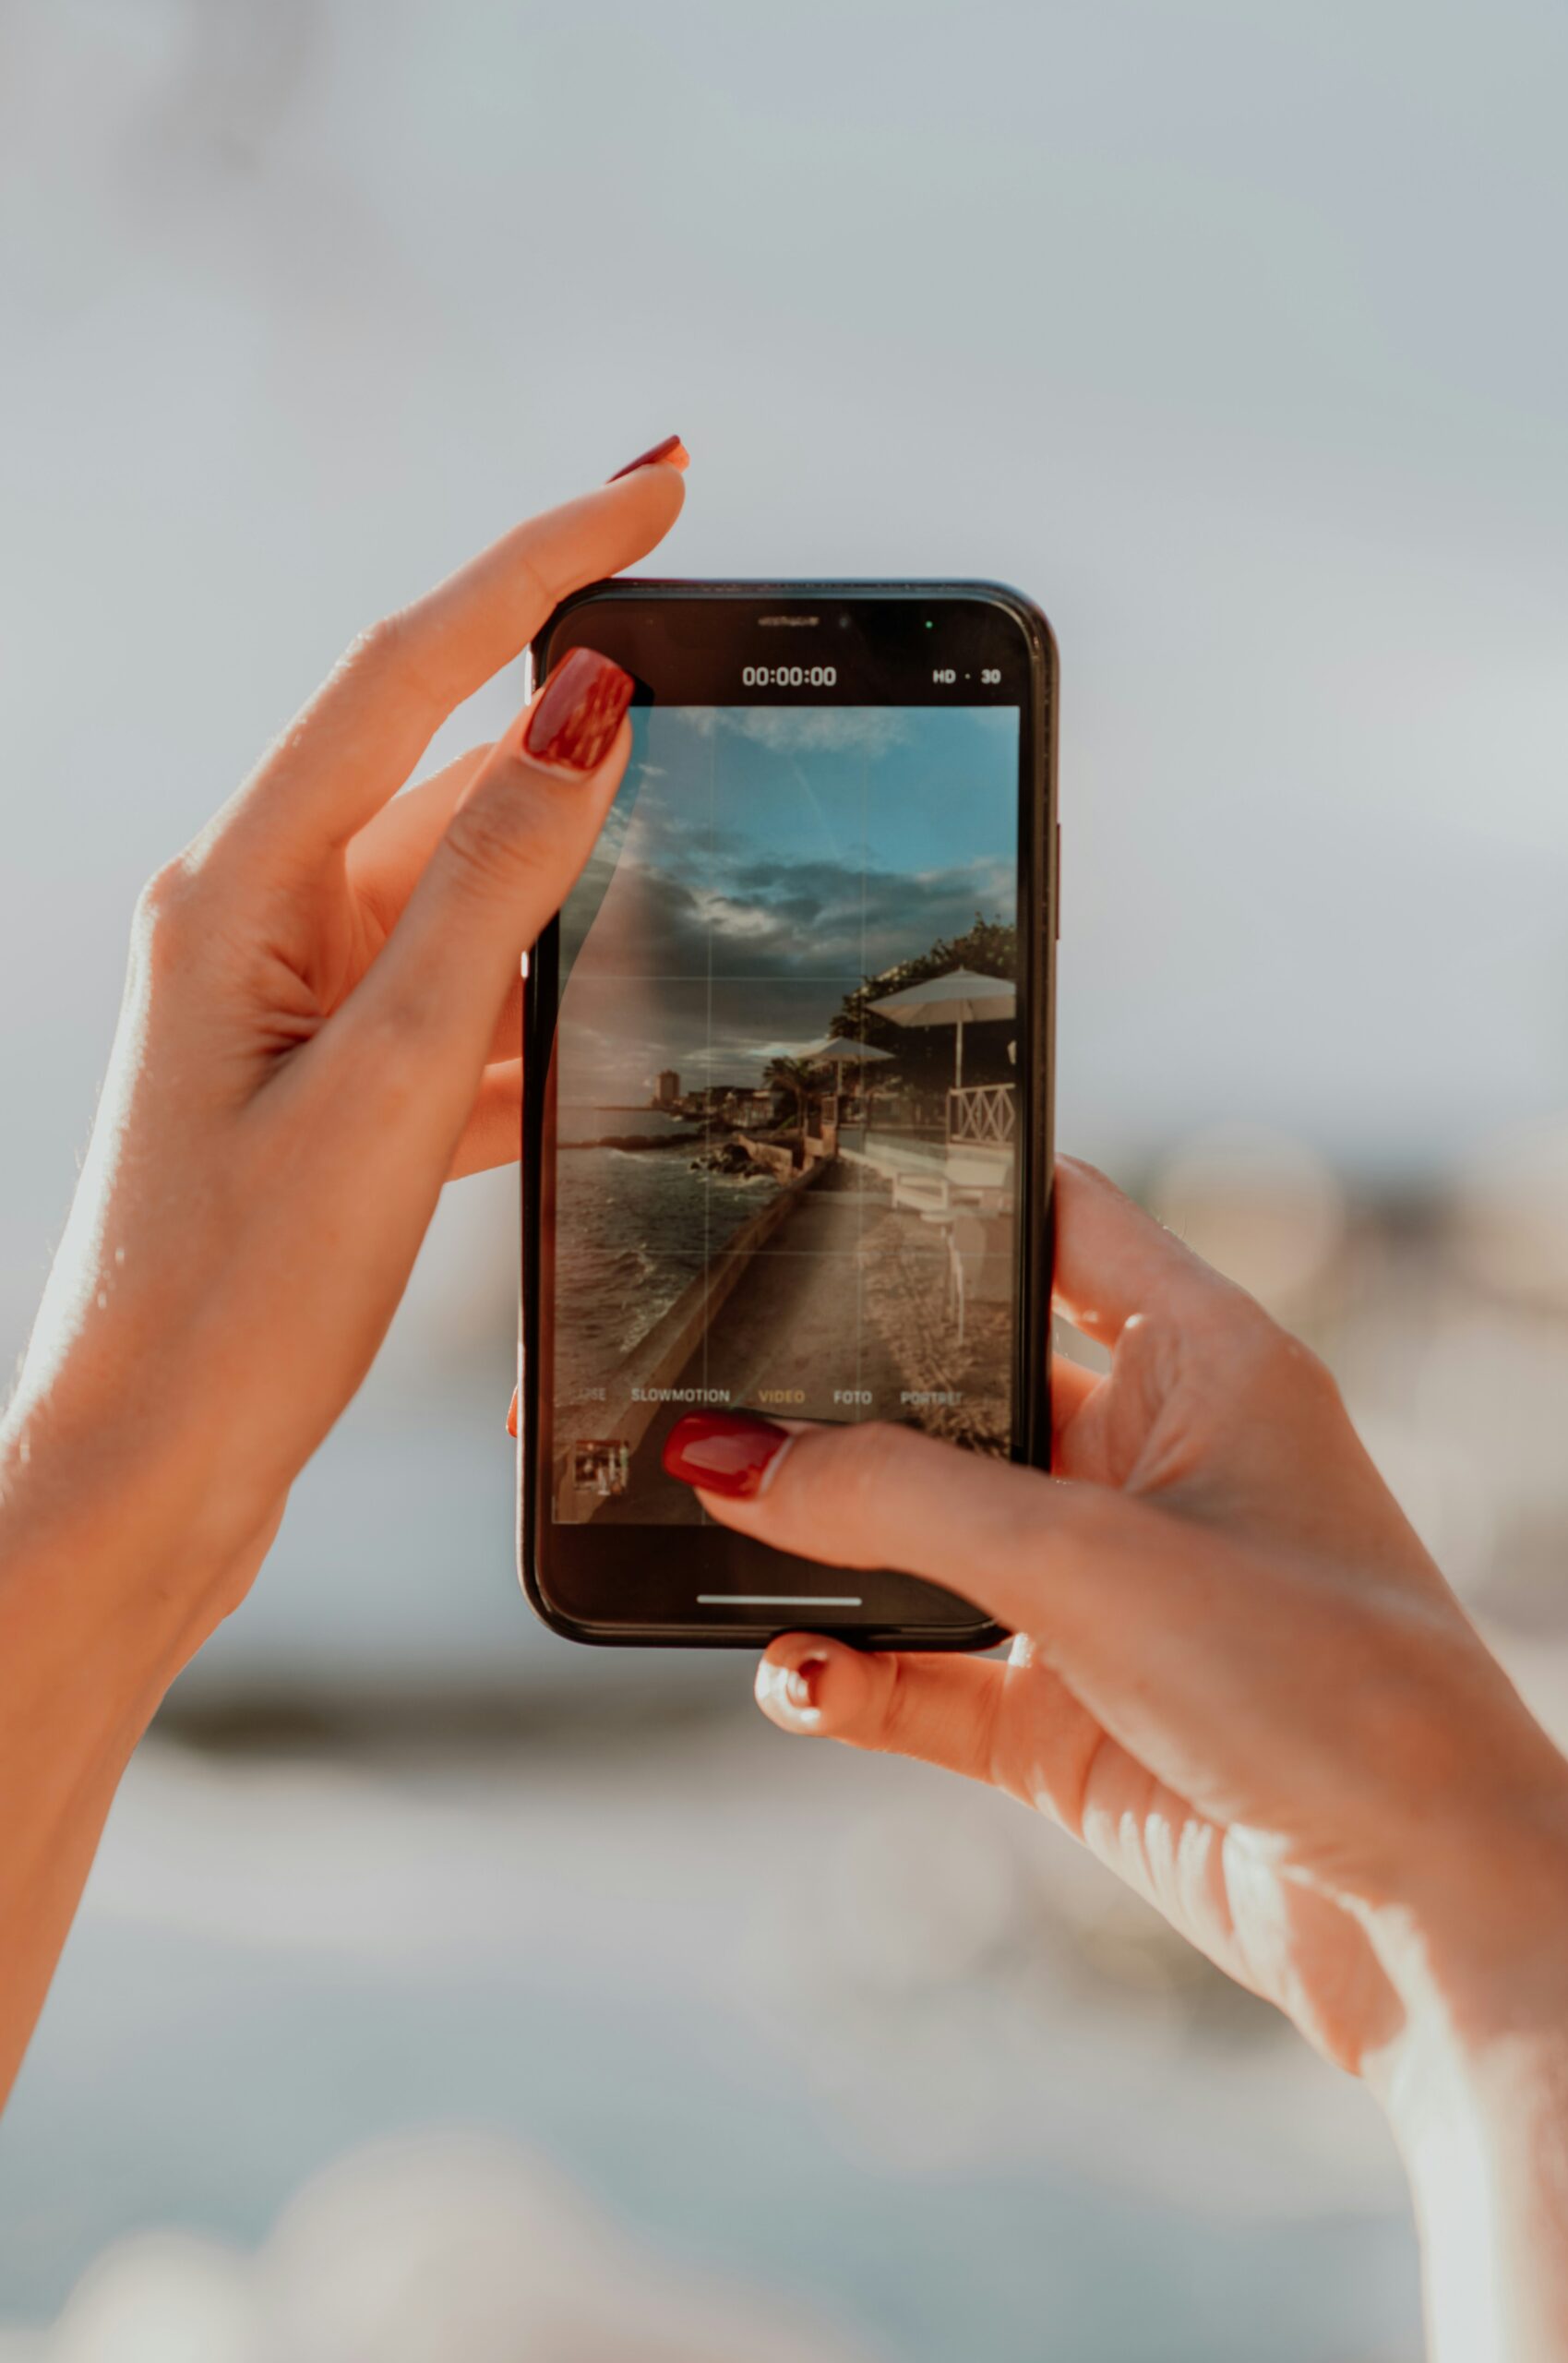 A person's hands holding a smartphone taking a video of a scenic beachside view displayed on the phone's screen, showcasing a clear sky and a serene coastal environment.